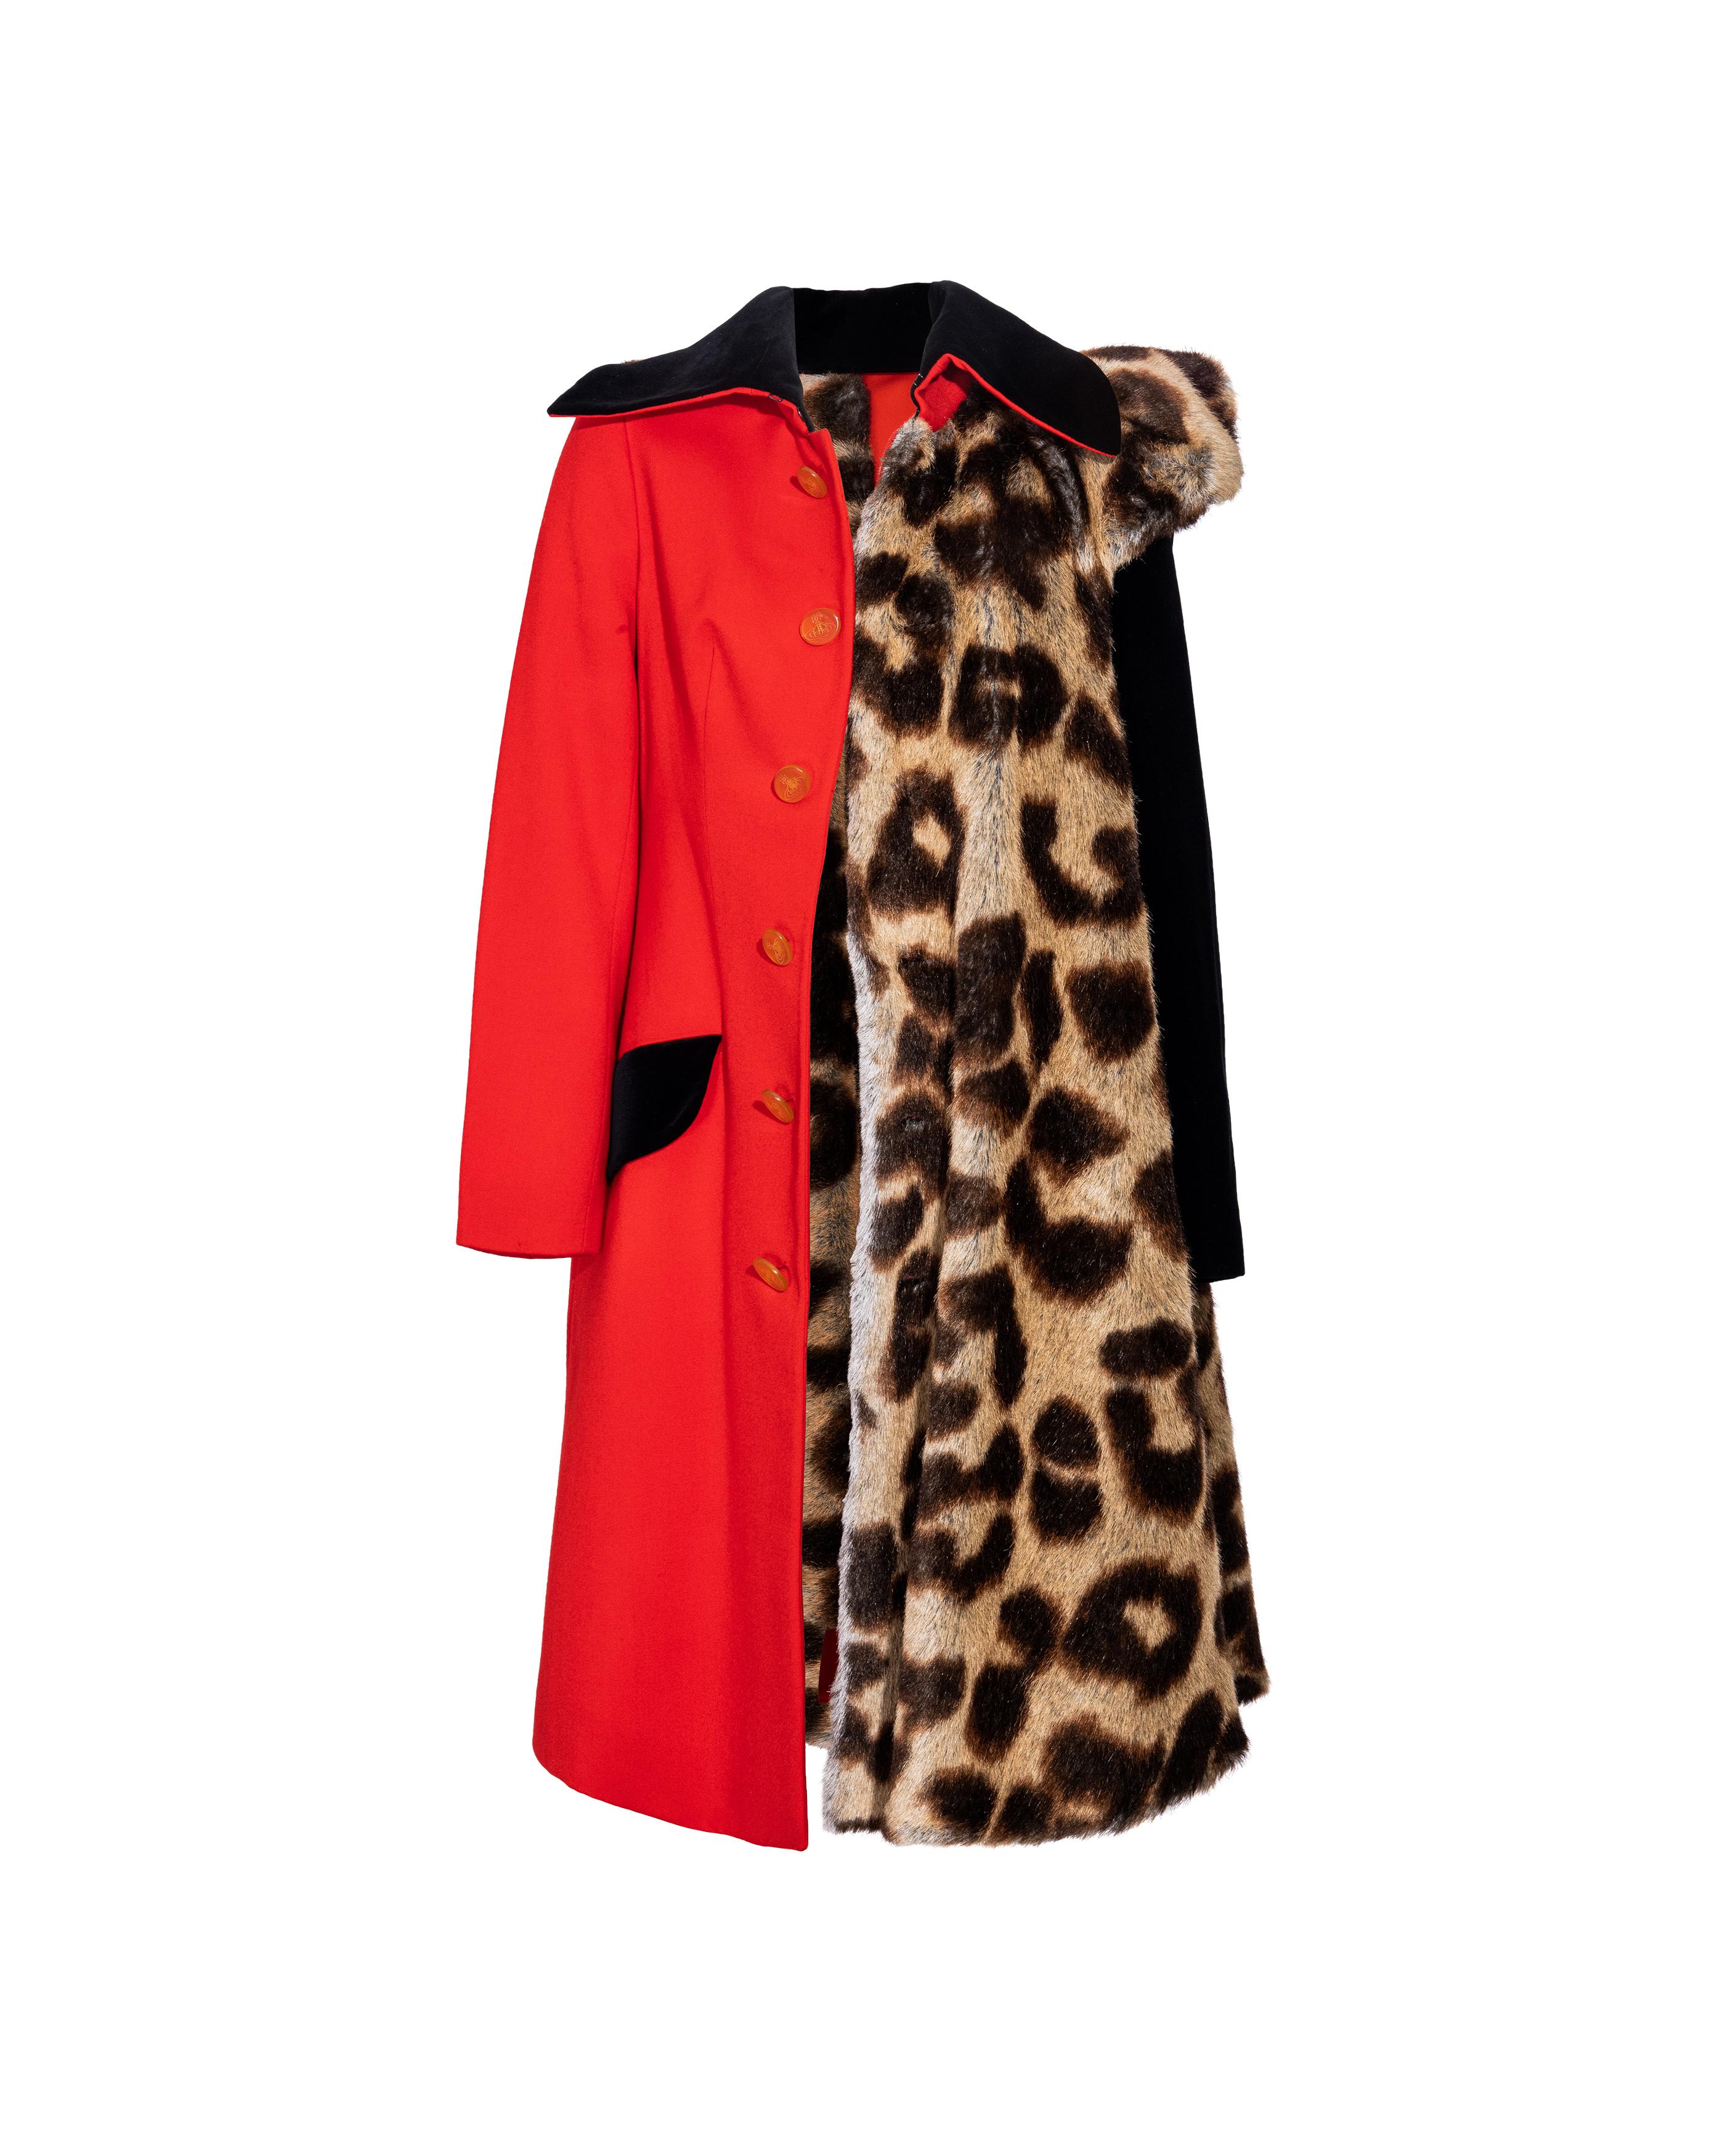 A/W 1996 Vivienne Westwood Red and Leopard Print Contrast Coat For Sale 4